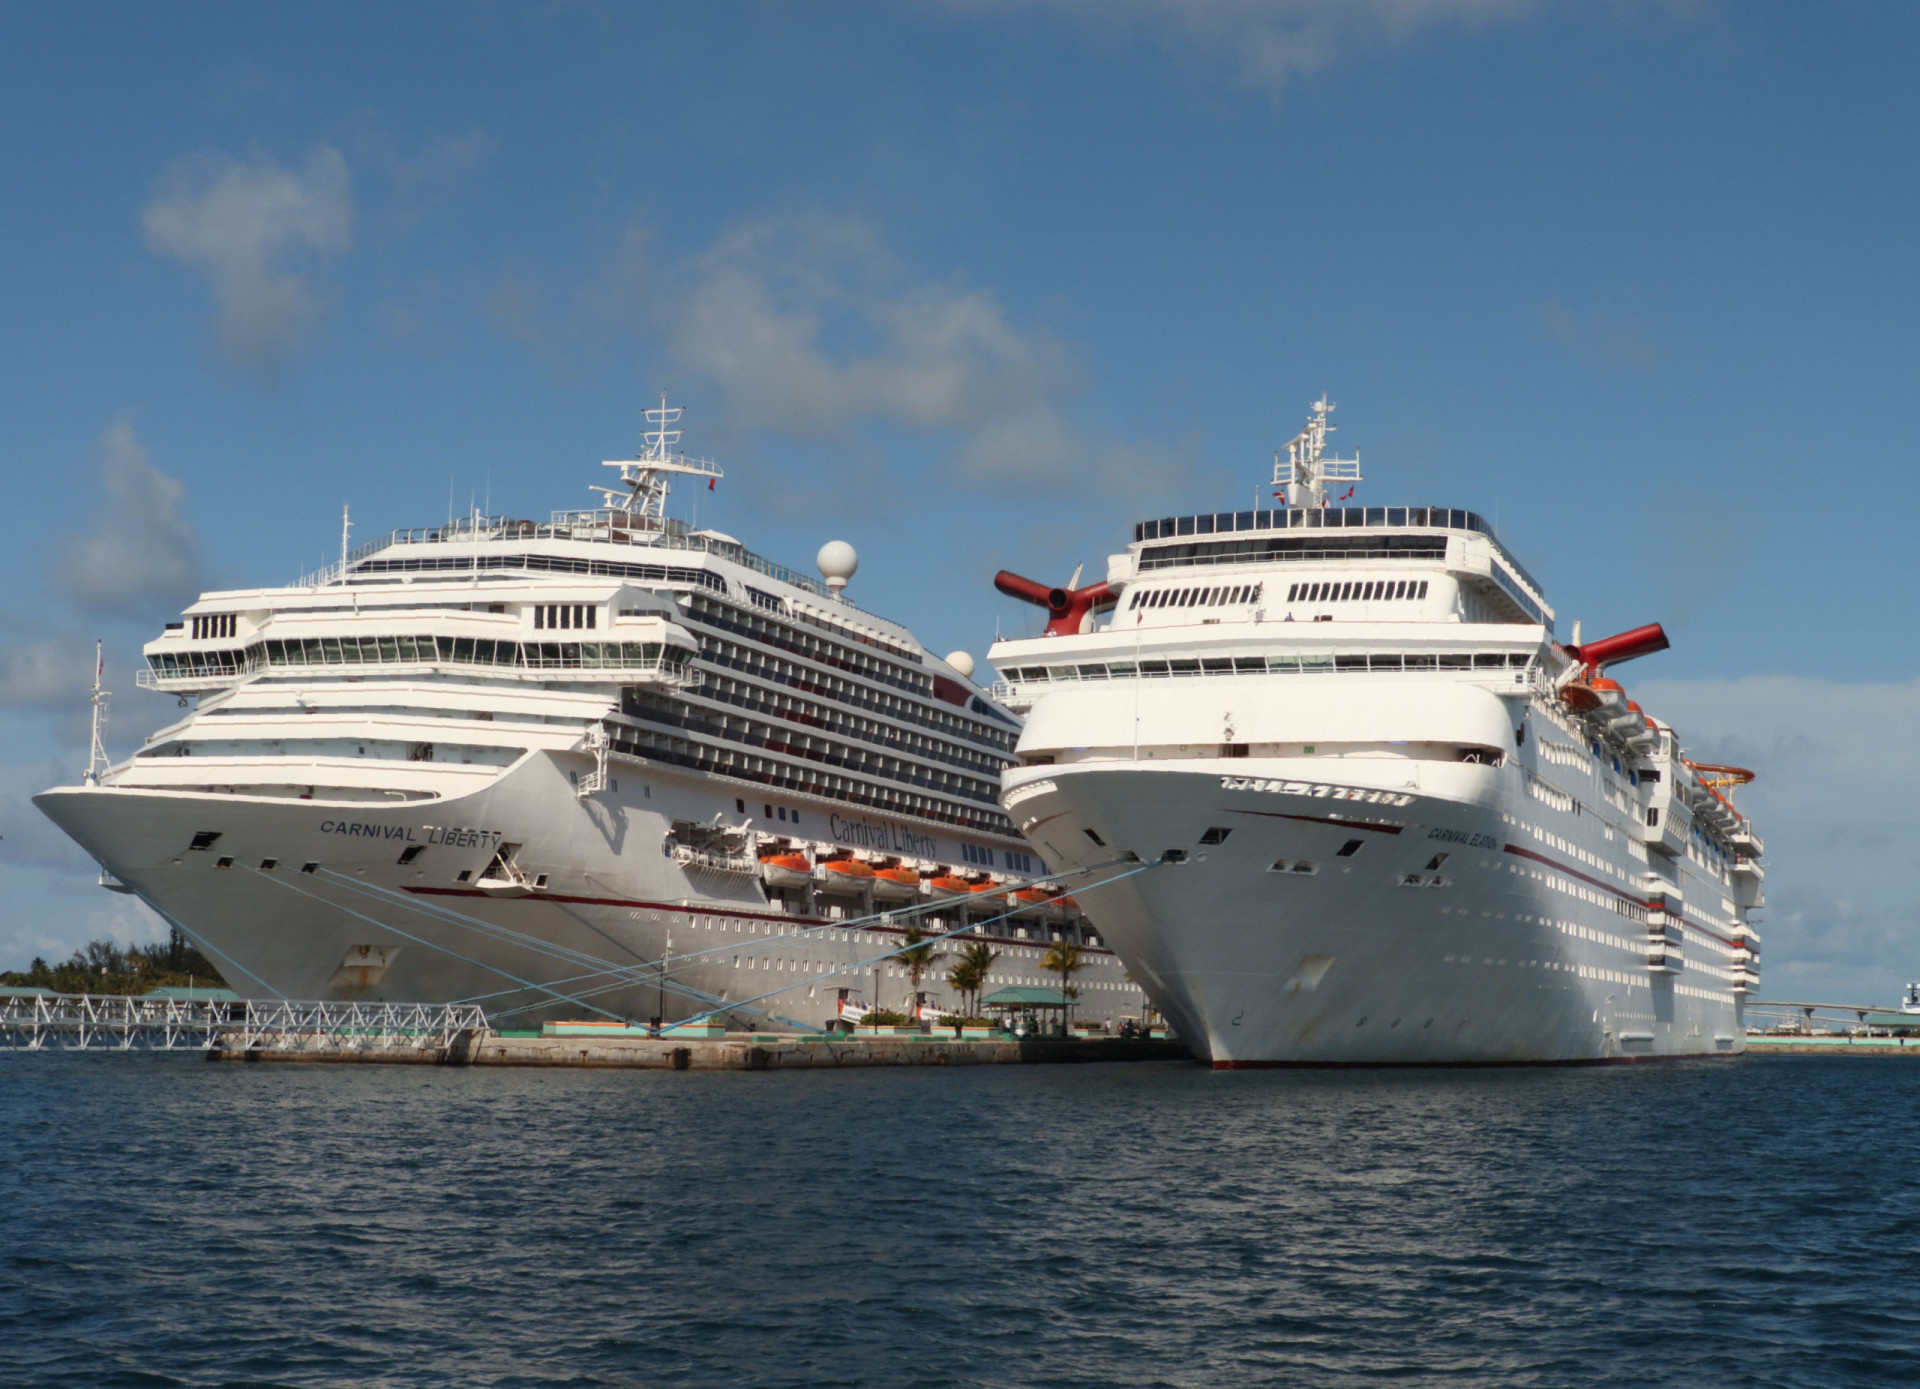 <p>Cruise ships regularly lose passengers, even crew members, and continue on their trip unless ordered to stop by the local coast guard. But often the coast guard won't be notified until hours after the person has been reported missing. Think about it this way: cruise ships are full of thousands of people, many of whom are <a href="https://www.starsinsider.com/celebrity/407679/stars-acting-under-the-influence-on-set" rel="noopener">intoxicated</a>, and no police are anywhere to be found. While security exists, they answer to the cruise ship company, which is focused on maximizing profits.</p><p>They do search for missing people, but there is only so long before the missing person must be abandoned. The US Coast Guard has suspended the search for Jaylen Hill, 30, who reportedly jumped overboard a Carnival Elation cruise this weekend as the ship was on its way back to Jacksonville, Florida, following a four-day trip to the Bahamas. The cruise line learned that Hill was missing late Sunday after his travel companion said he hadn't seen Hill all day. After searching more than 1,300 square miles (3,367 sq km), the search was suspended. </p><p>Have a look at some of the stories behind how people went missing on cruise ships and were never to be found again.</p><p>You may also like:<a href="https://www.starsinsider.com/n/69750?utm_source=msn.com&utm_medium=display&utm_campaign=referral_description&utm_content=310972v6en-en"> The best horror films in cinema history </a></p>